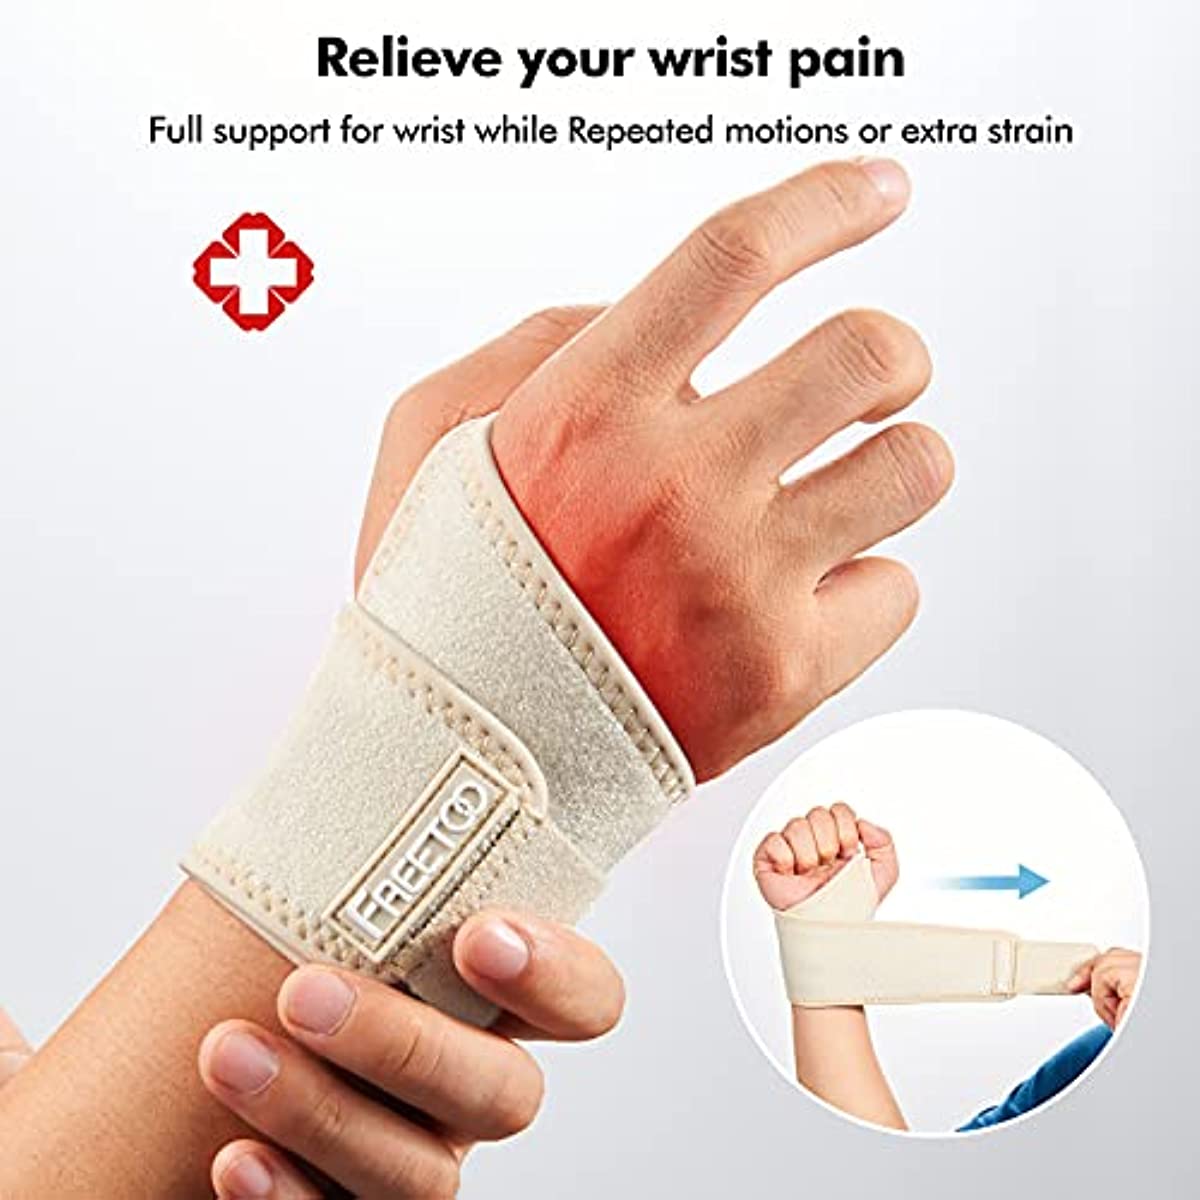 FREETOO Air Mesh Wrist Brace for Carpal Tunnel Support for Pain Relief, Compression Wrist Support Strap at Work for Women Men,Adjustable Wrist Guard fit Right Left Hand for Arthritis Tendonitis(Beige)